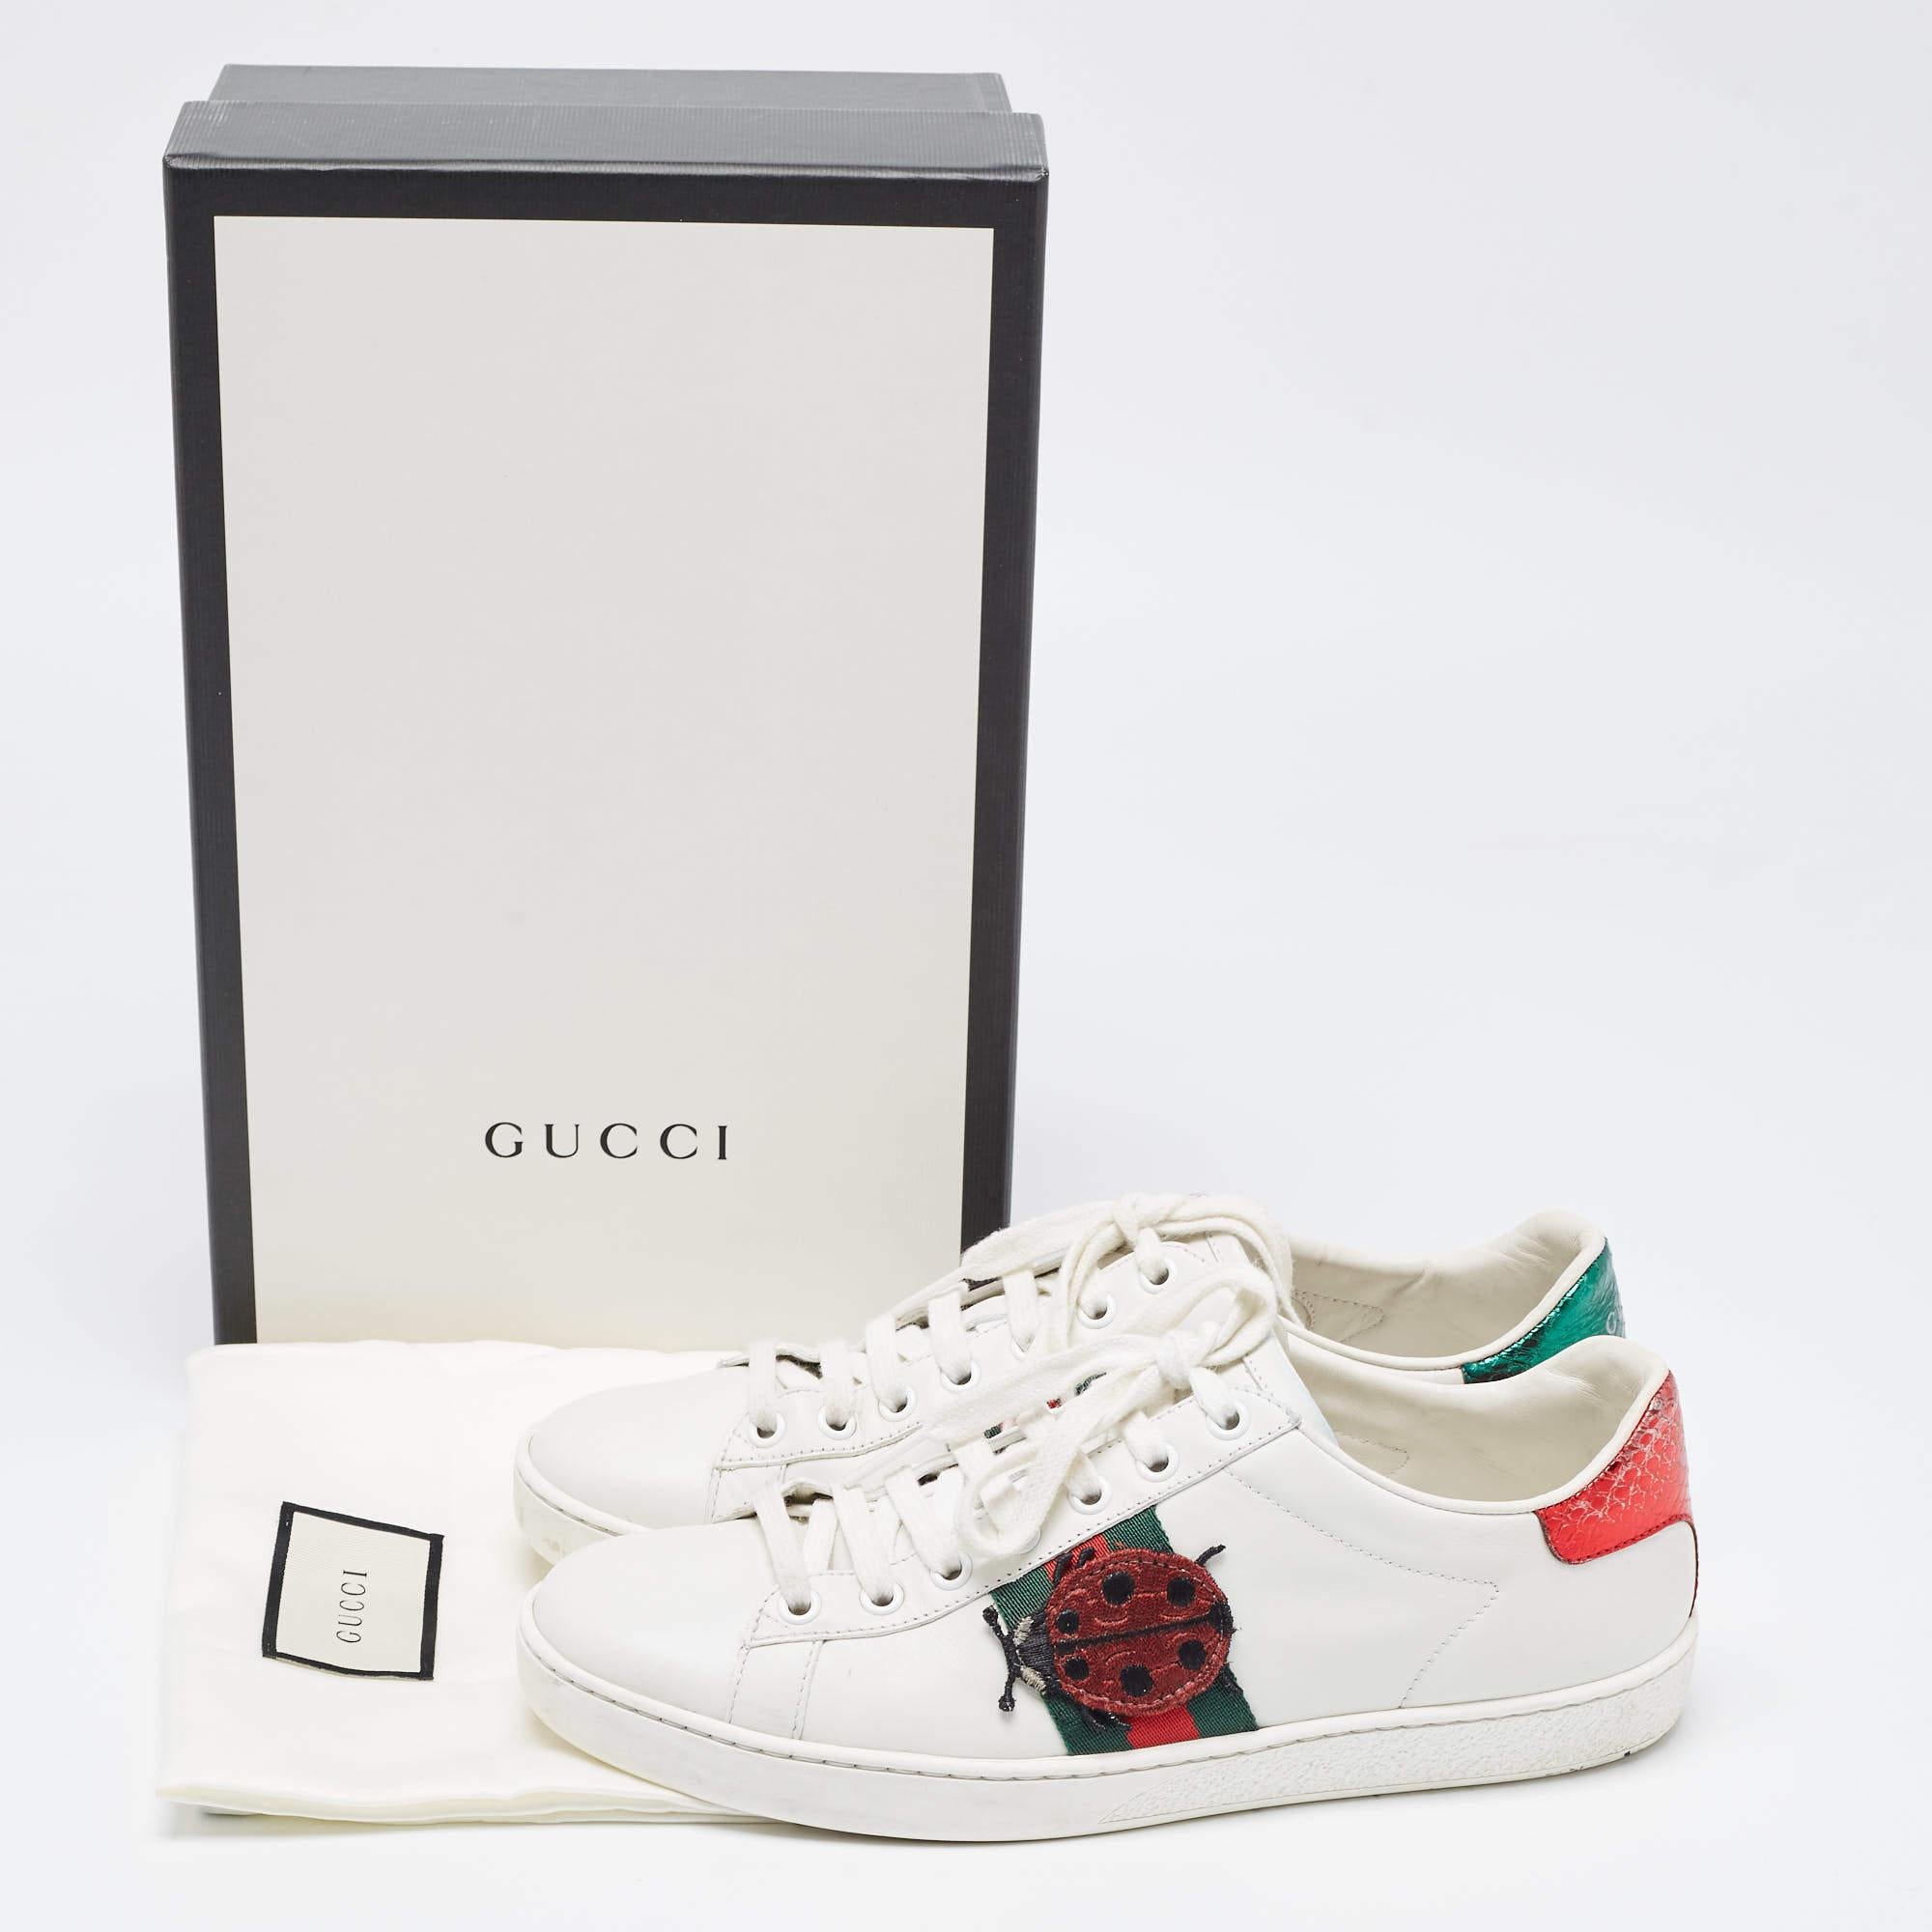 Gucci White/Red Leather and Snake Embossed Leather Ace Pineapple Sneakers Size 3 5